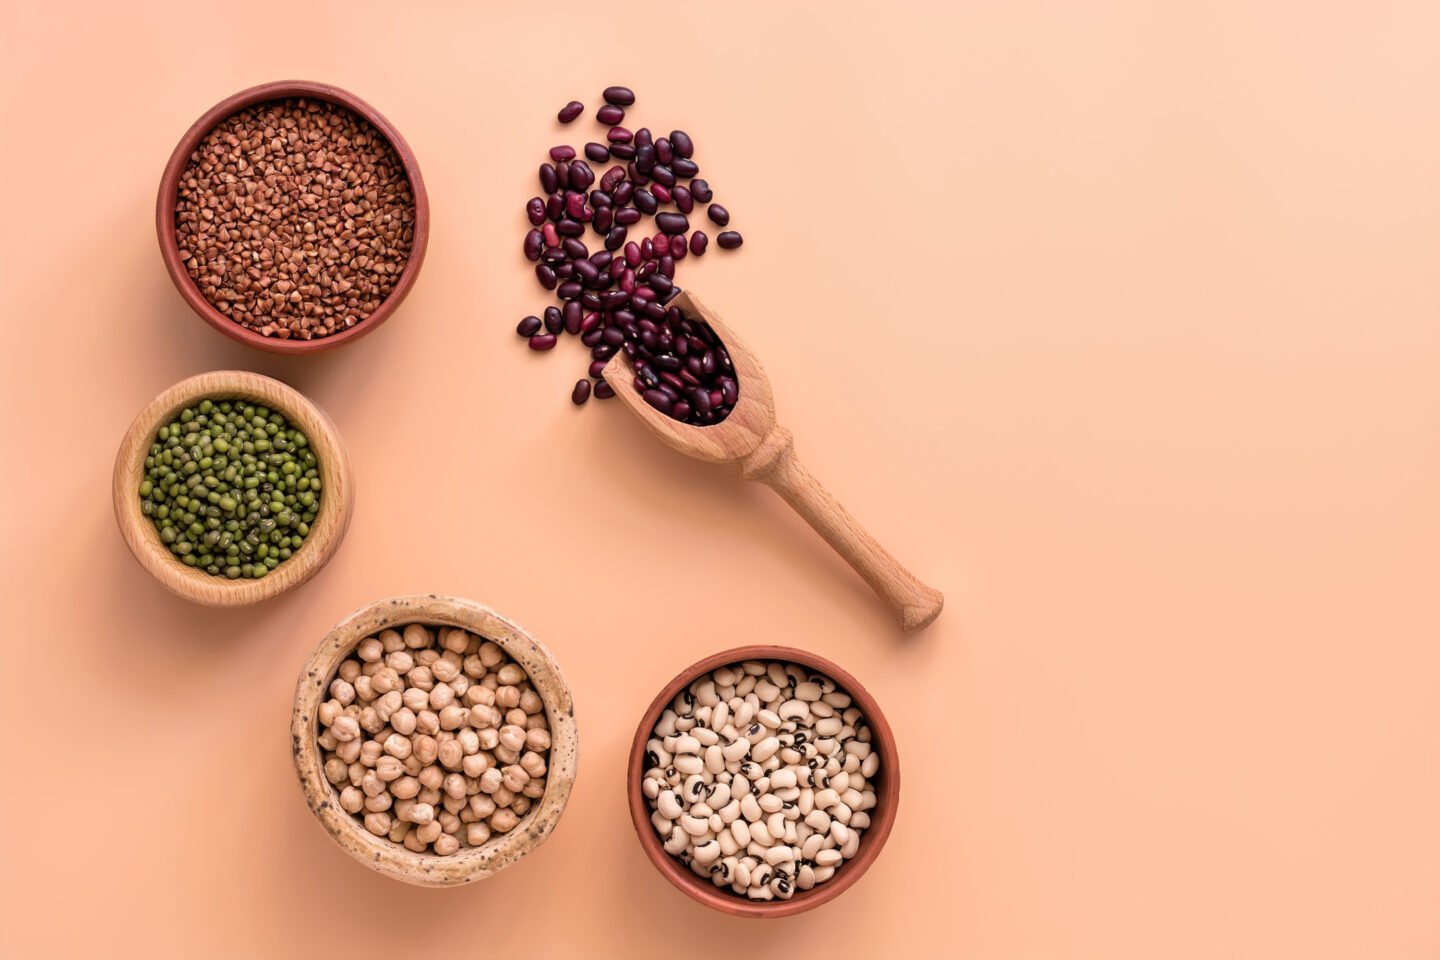 bowls of different beans and legumes